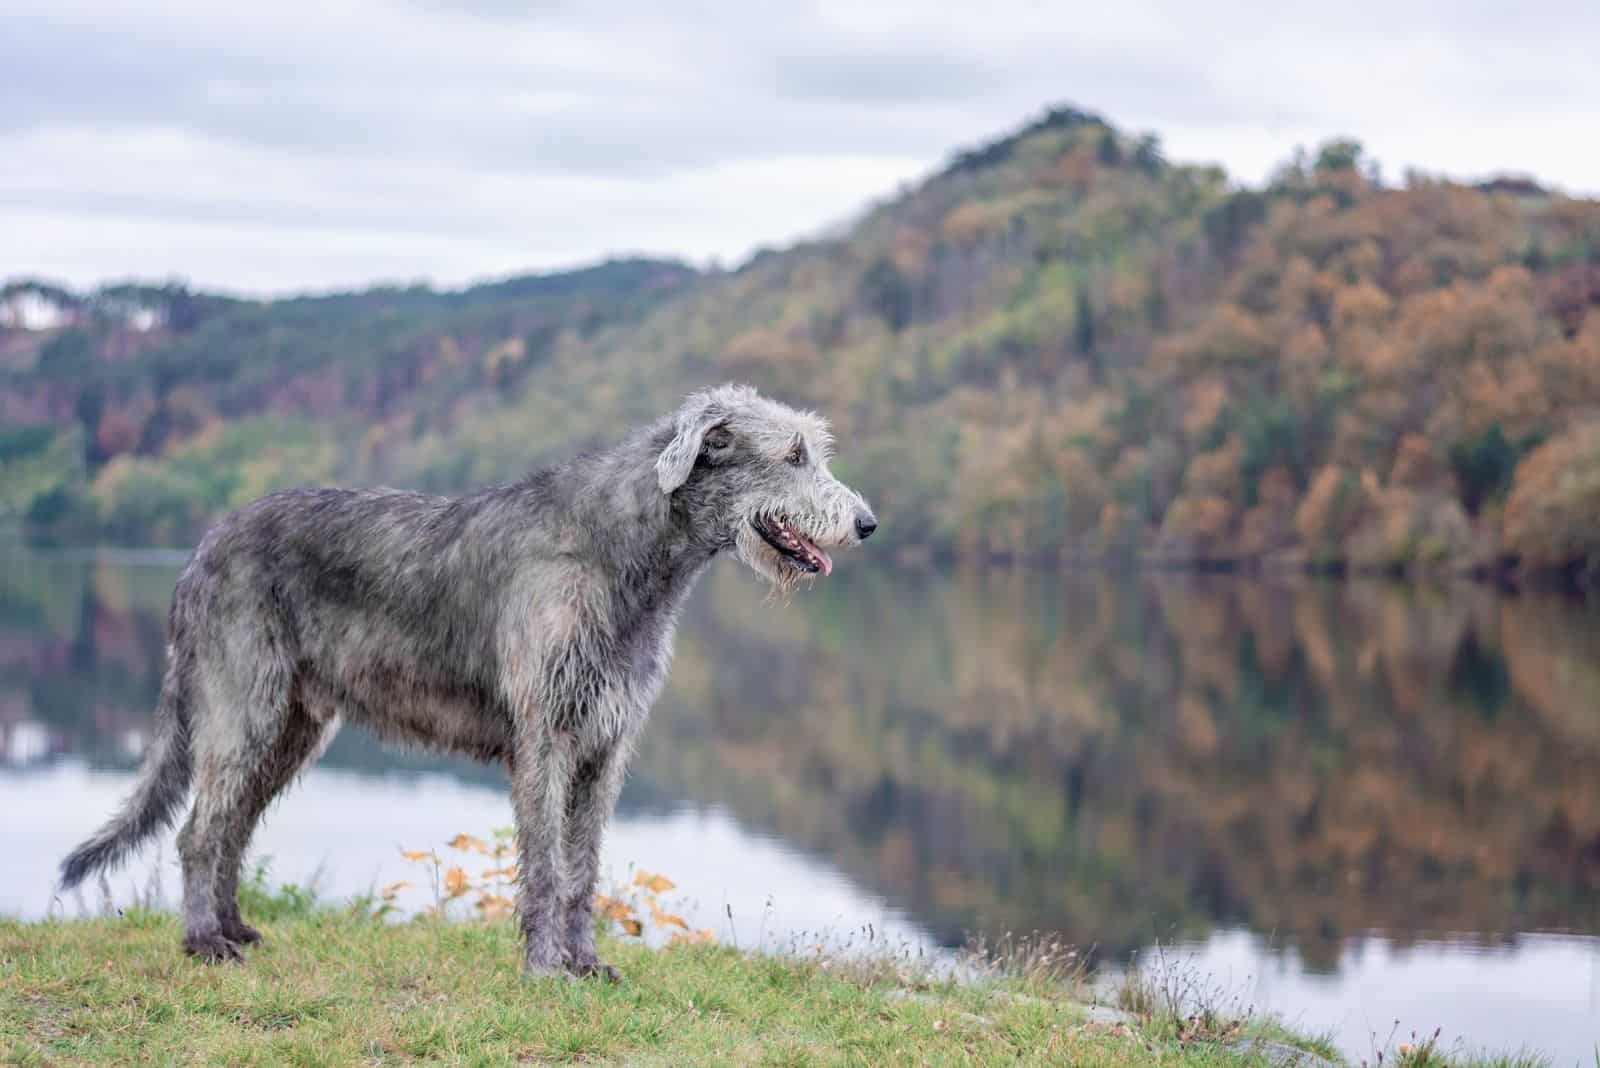 A huge Irish wolfhound stands on the river bank with a blurred autumn background